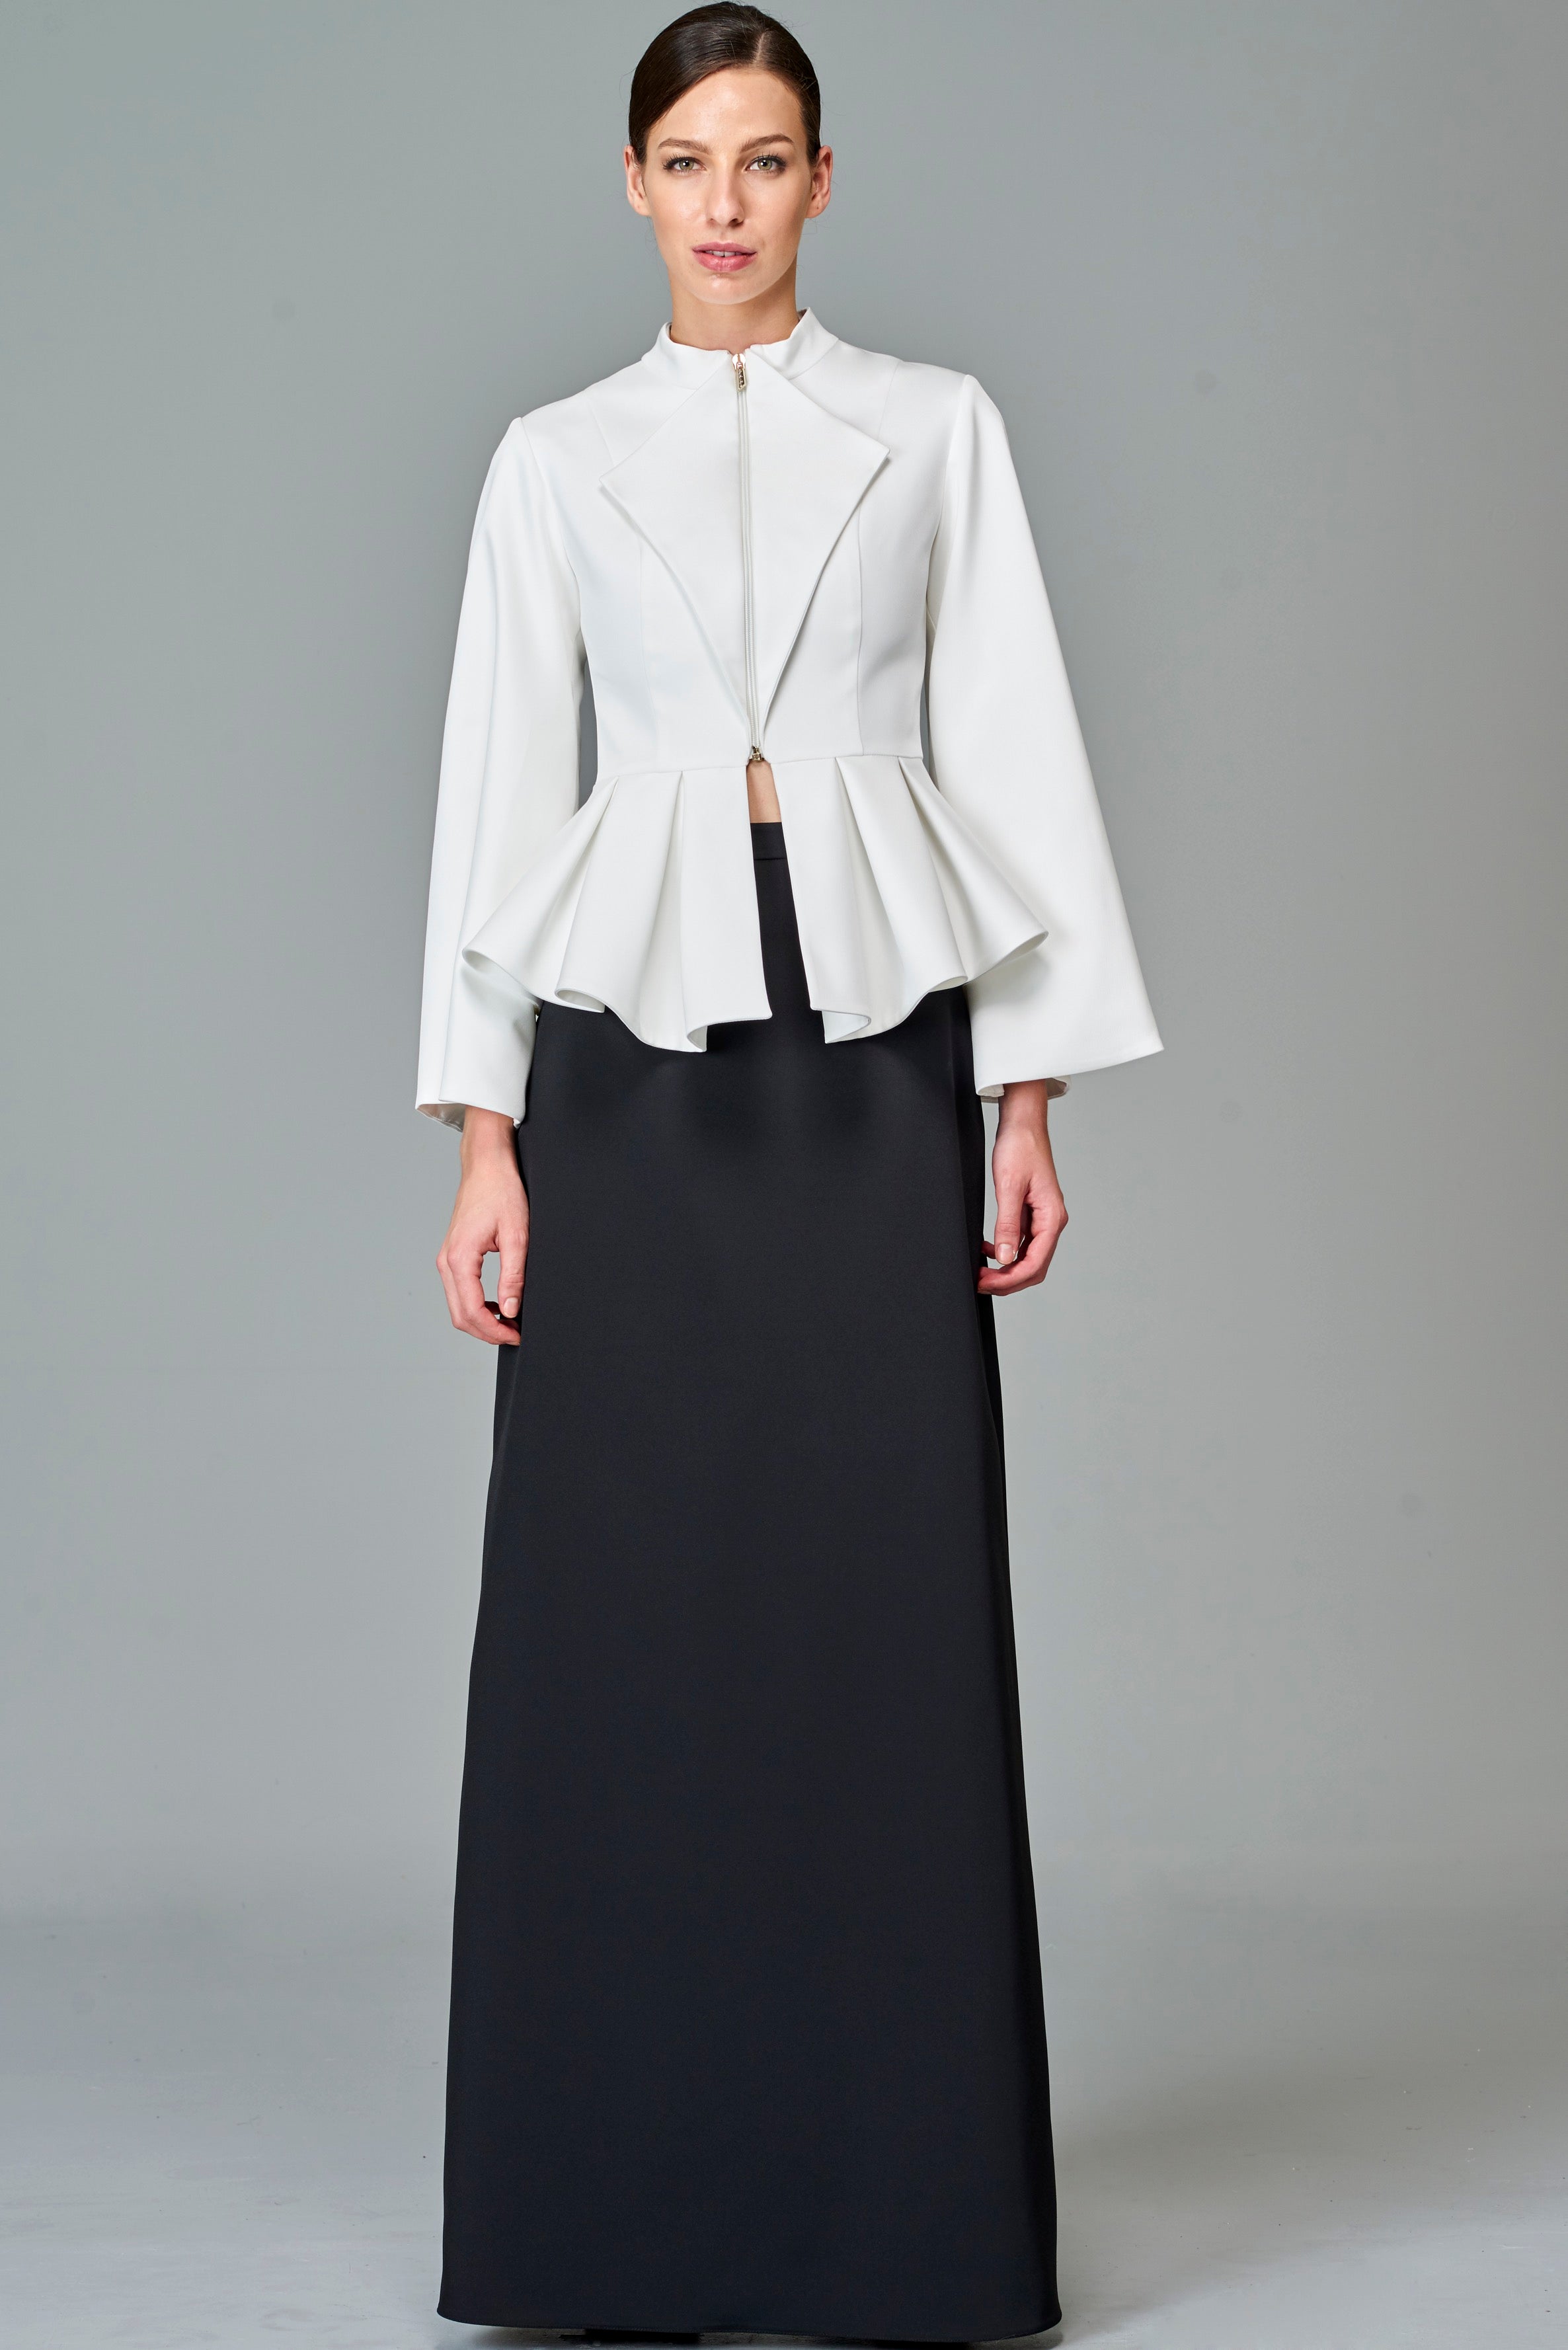 Ruffled Jacket with A-Line Long Skirt